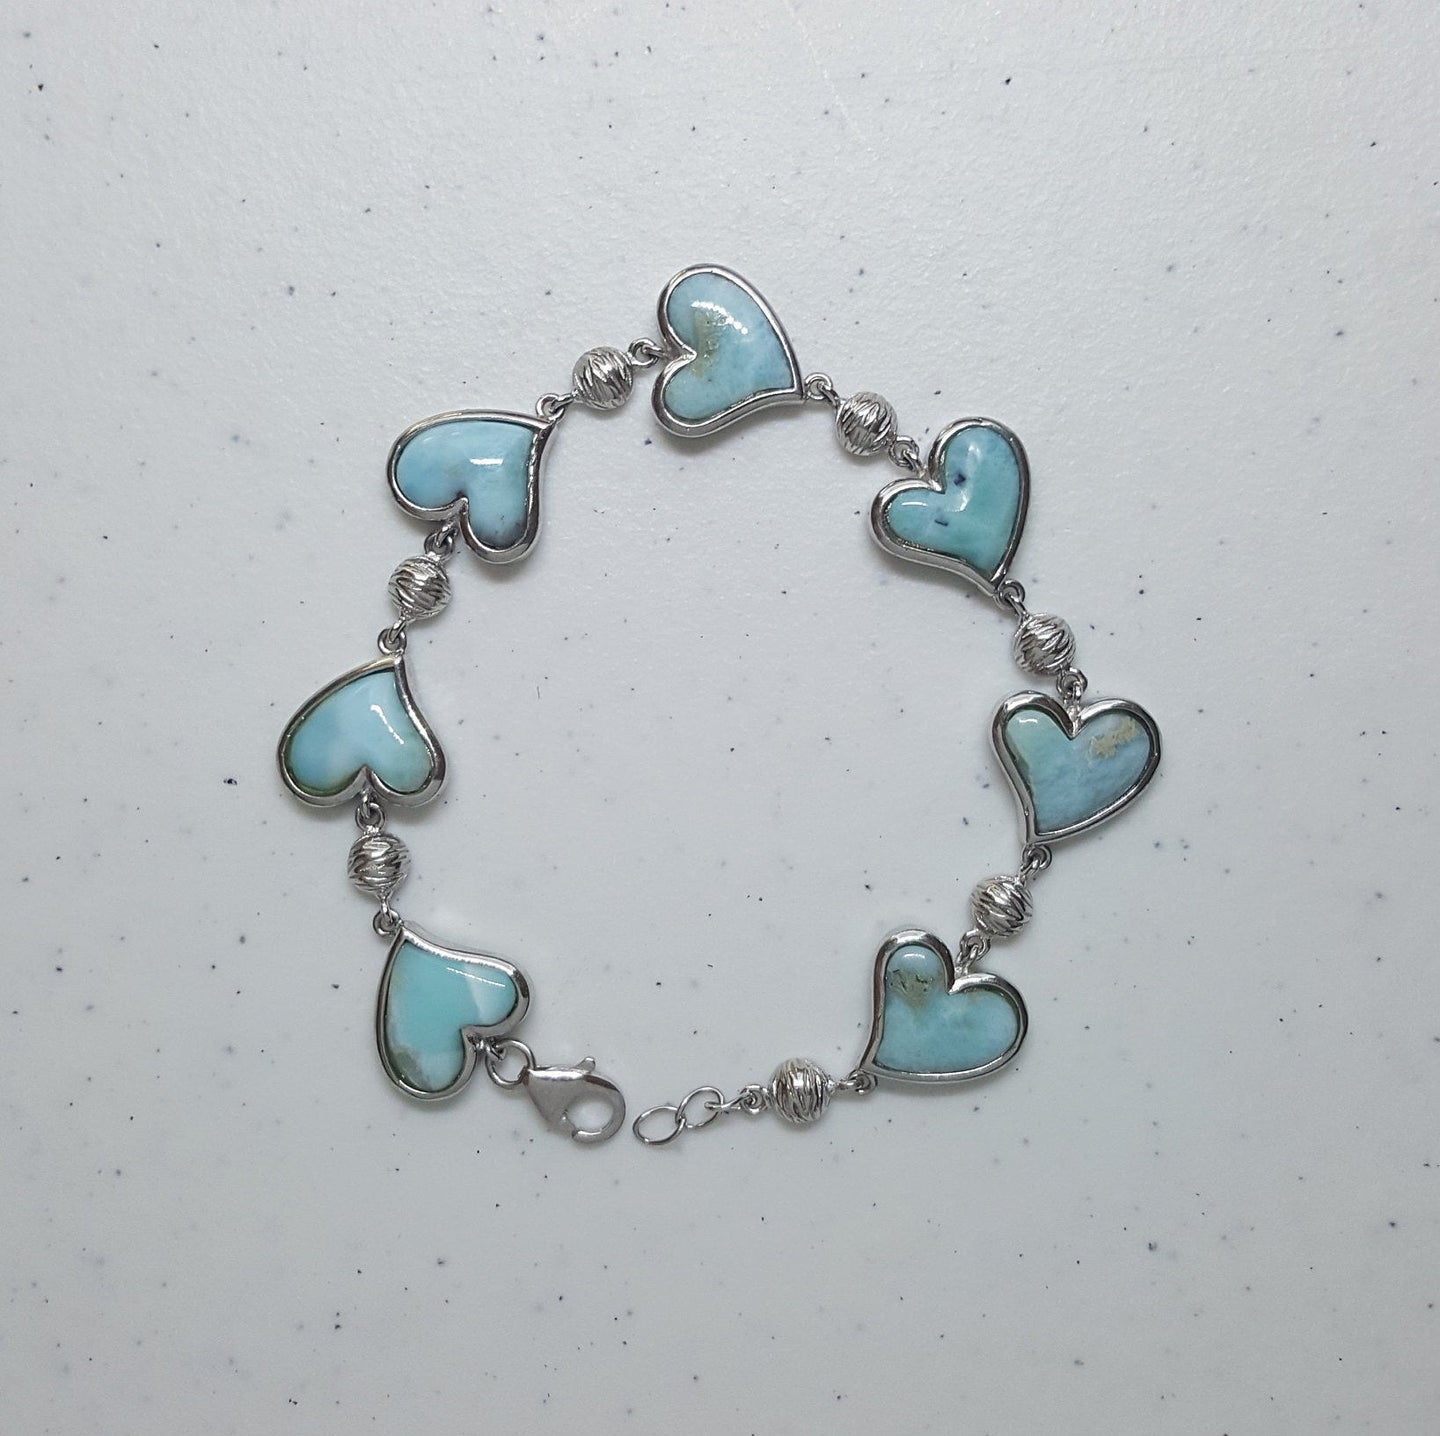 Little Heart Natural Larimar with round beads sterling silver chain bracelet